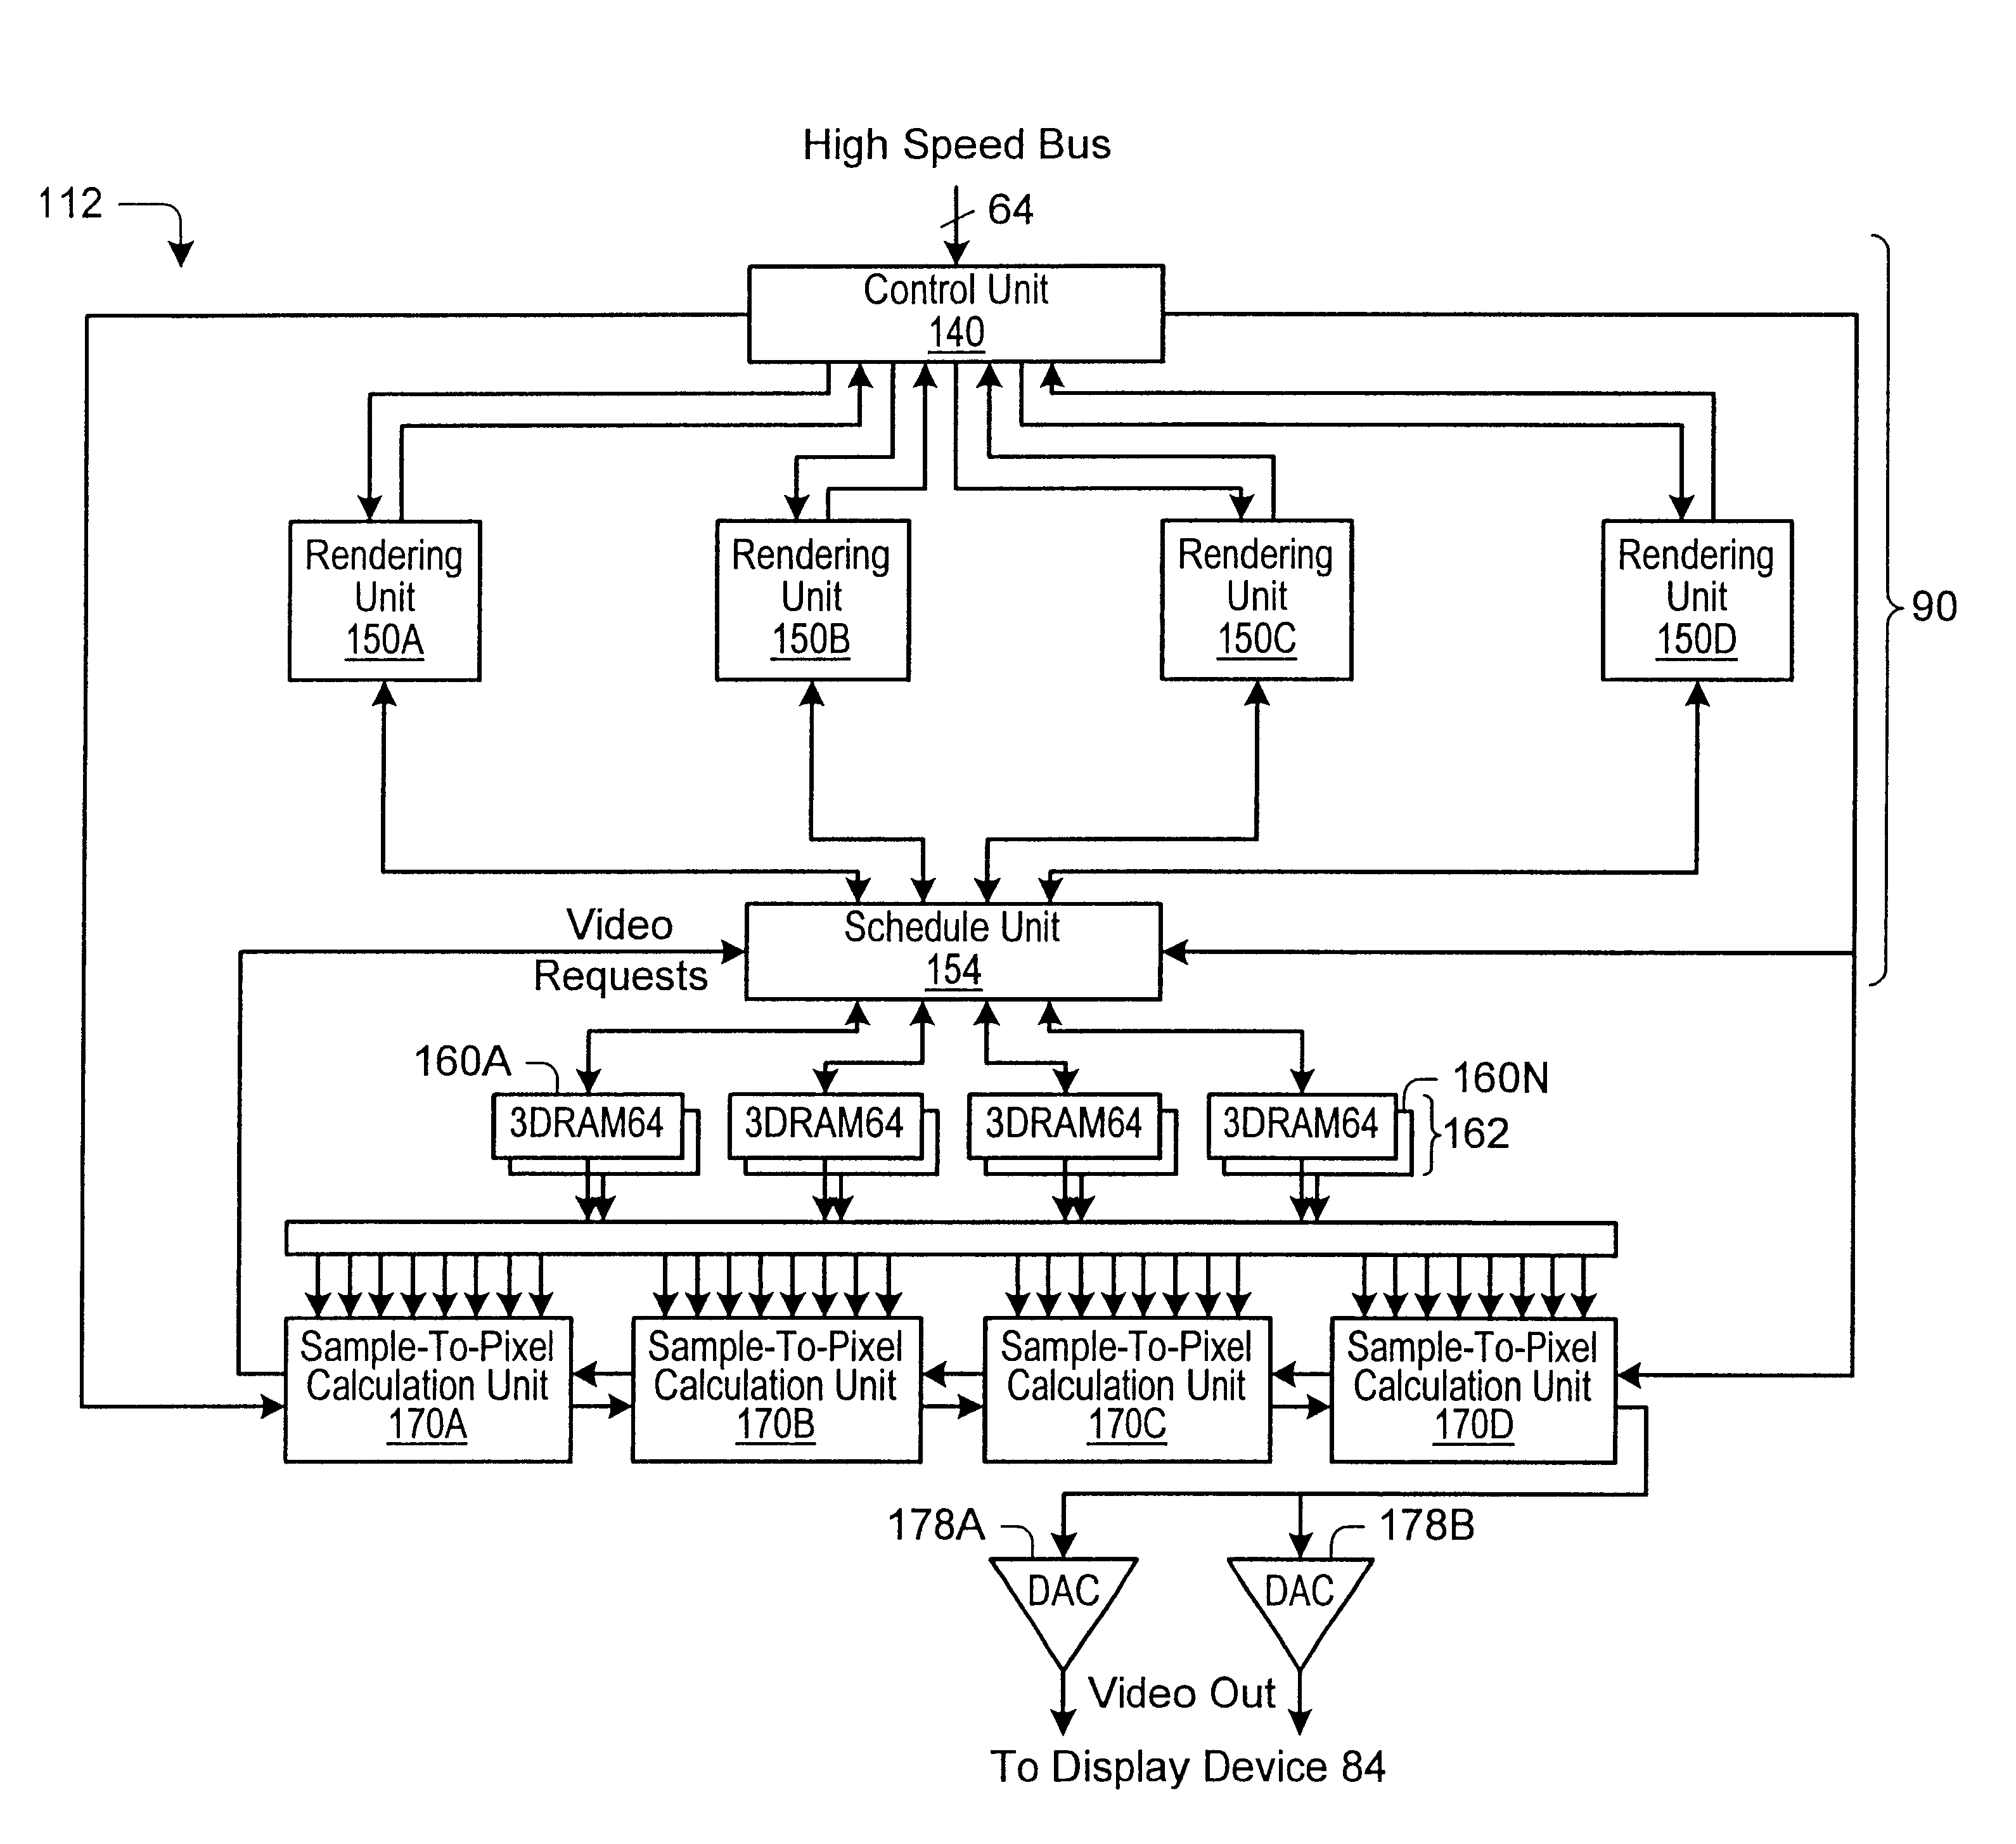 Graphics system configured to parallel-process graphics data using multiple pipelines